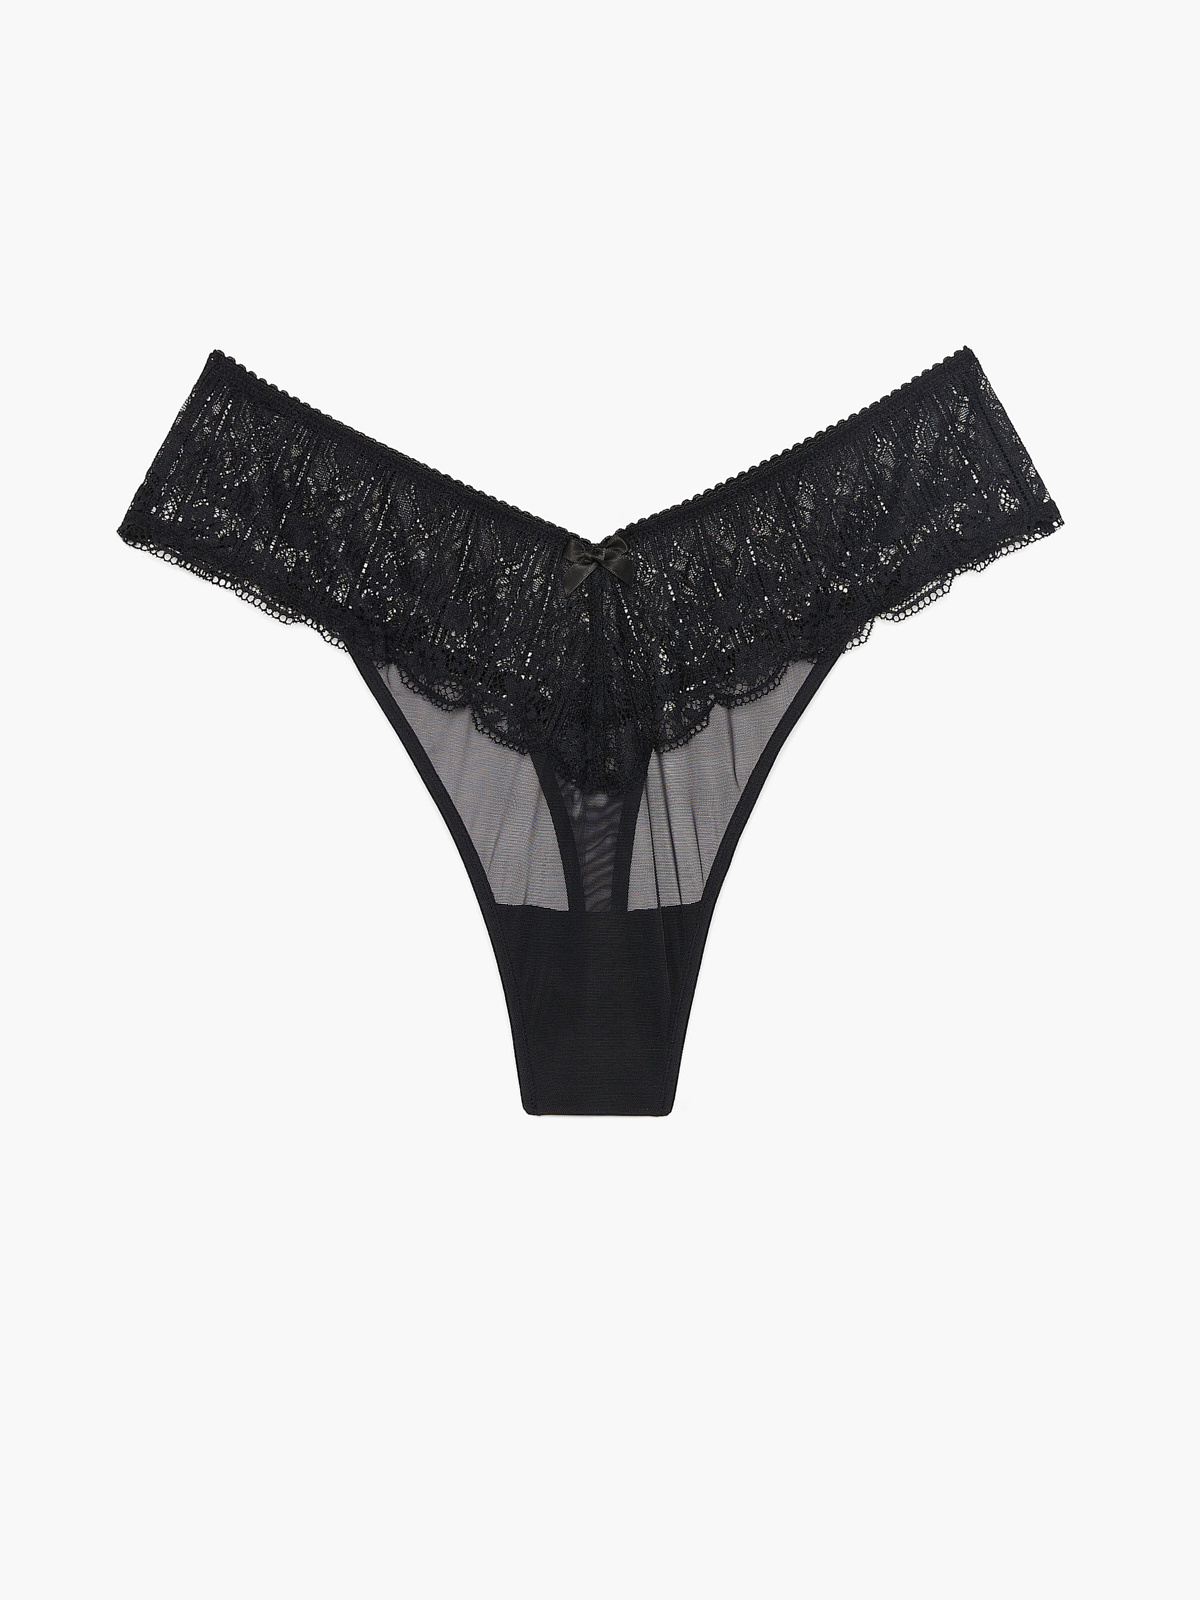 https://cdn.savagex.com/media/images/products/UD2252300-0687/DECO-GLASS-LACE-THONG-PANTY-UD2252300-0687-LAYDOWN-1200x1600.jpg